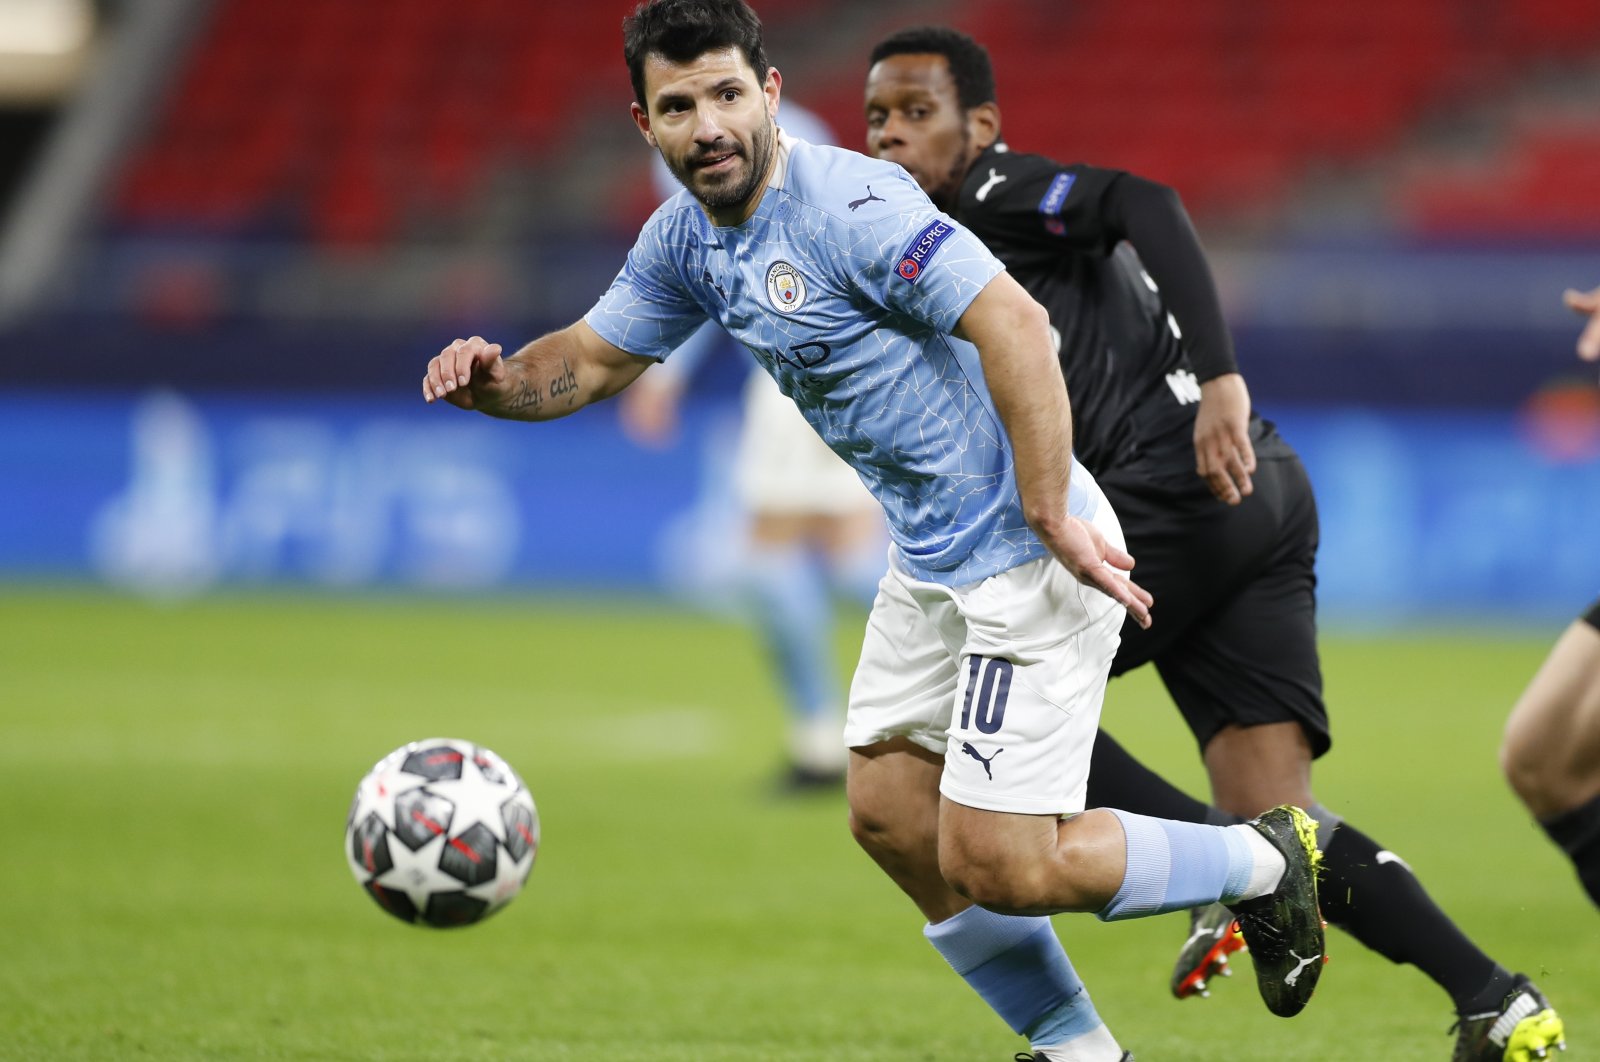 Manchester City's Sergio Aguero chases the ball during a Champions League round of 16 second-leg match against Borussia Moenchengladbach at the Puskas Arena, Budapest, Hungary, March 16, 2021. (AP Photo)